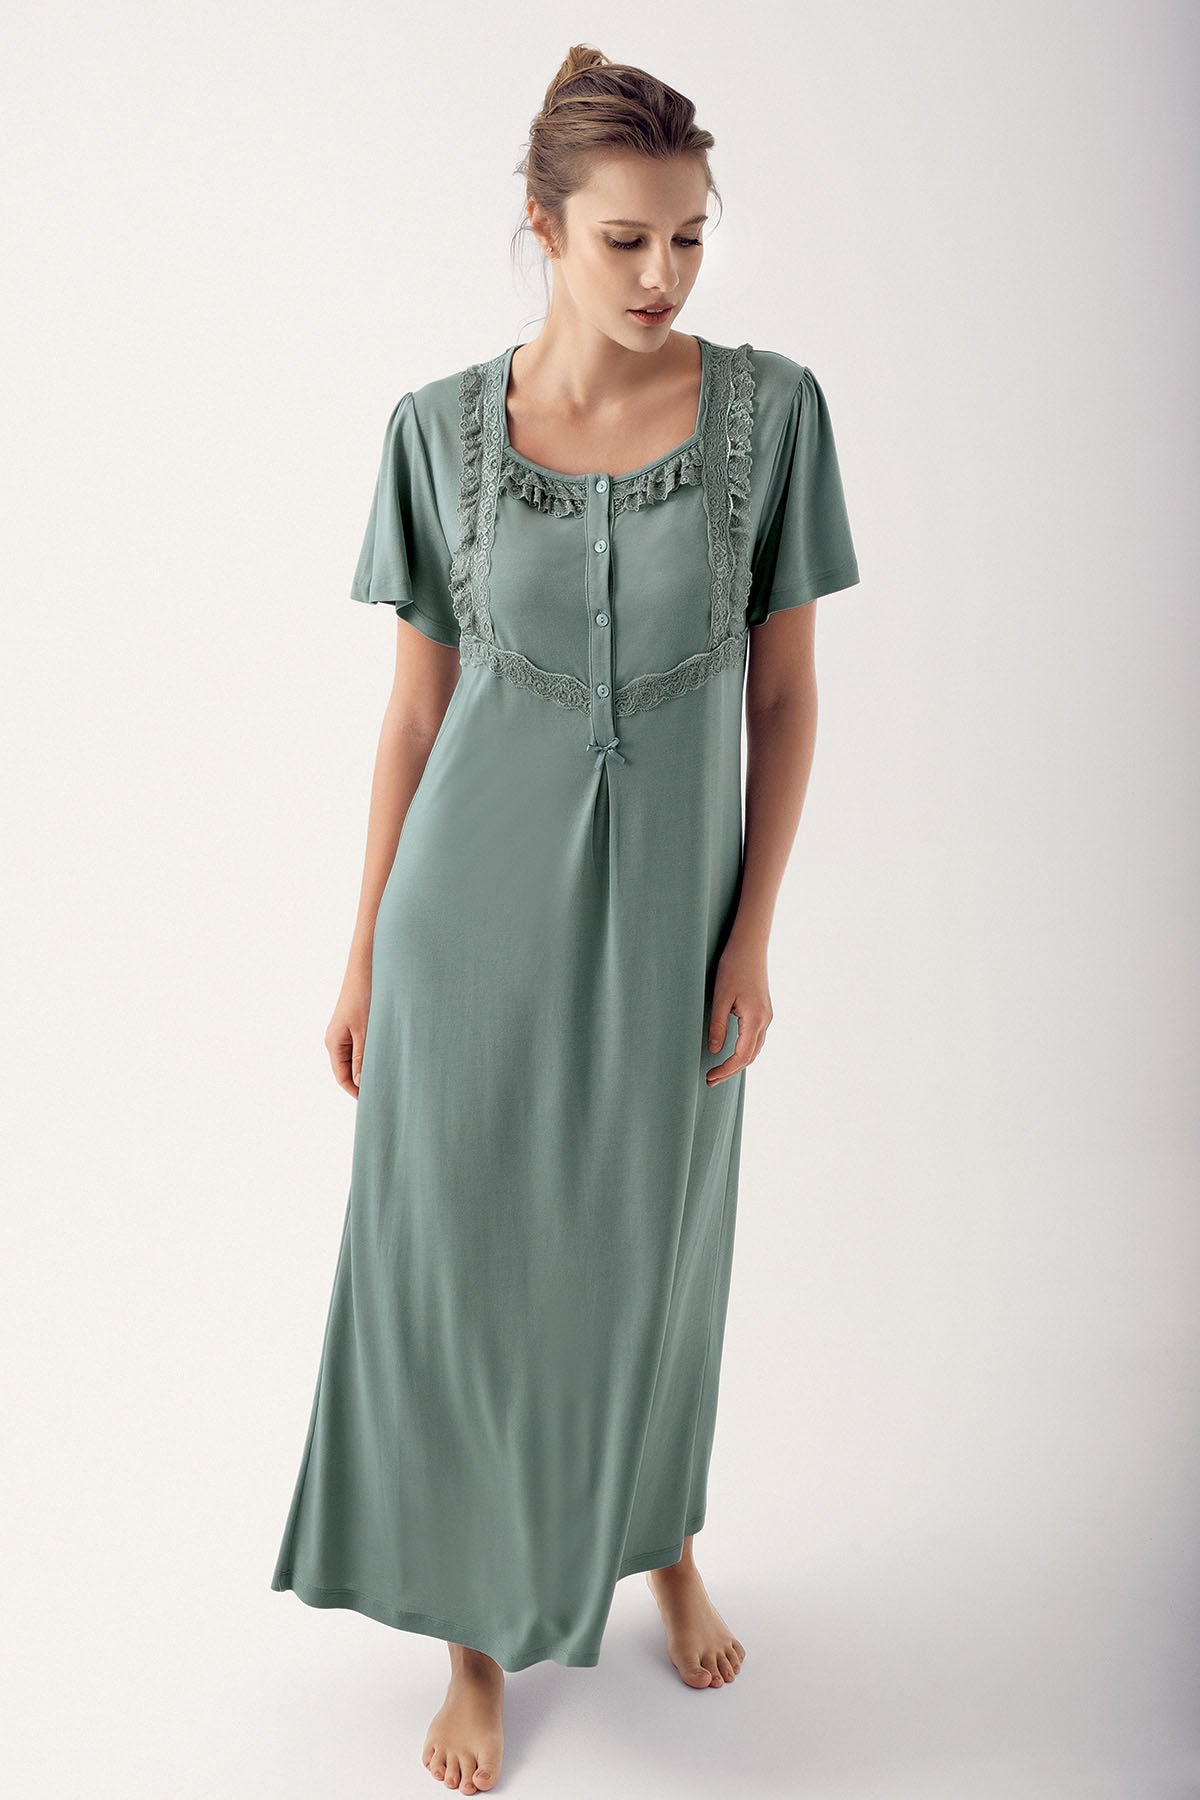 Shopymommy 14110 Square Collar Lace Plus Size Maternity & Nursing Nightgown Green